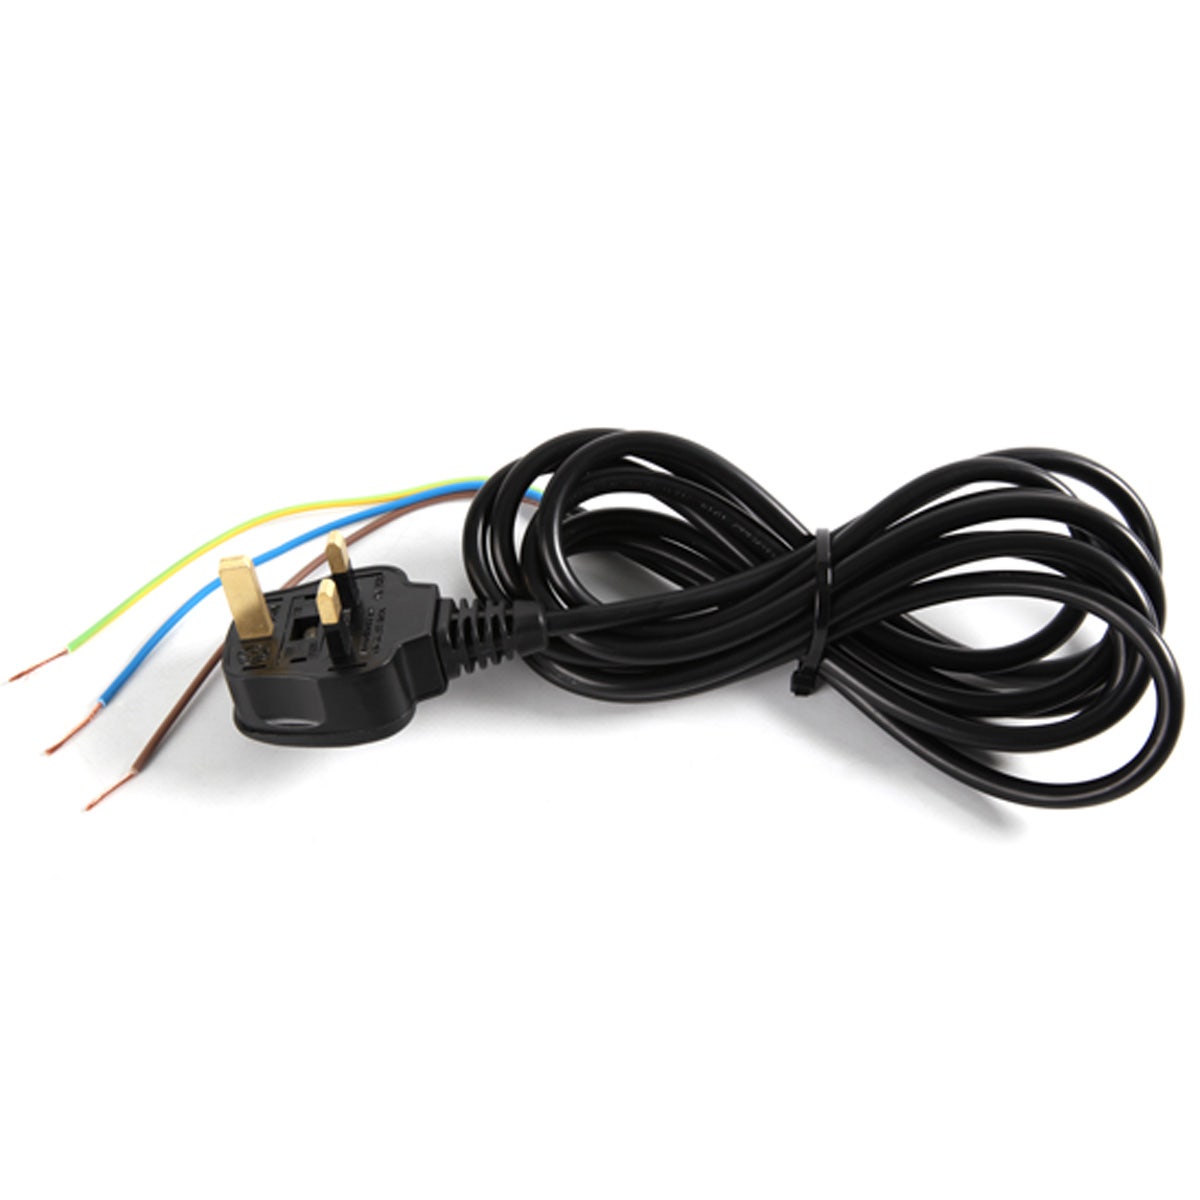 Mains Lead (3-Core Black) With Moulded 5 Amp Plug & Stripped Ends